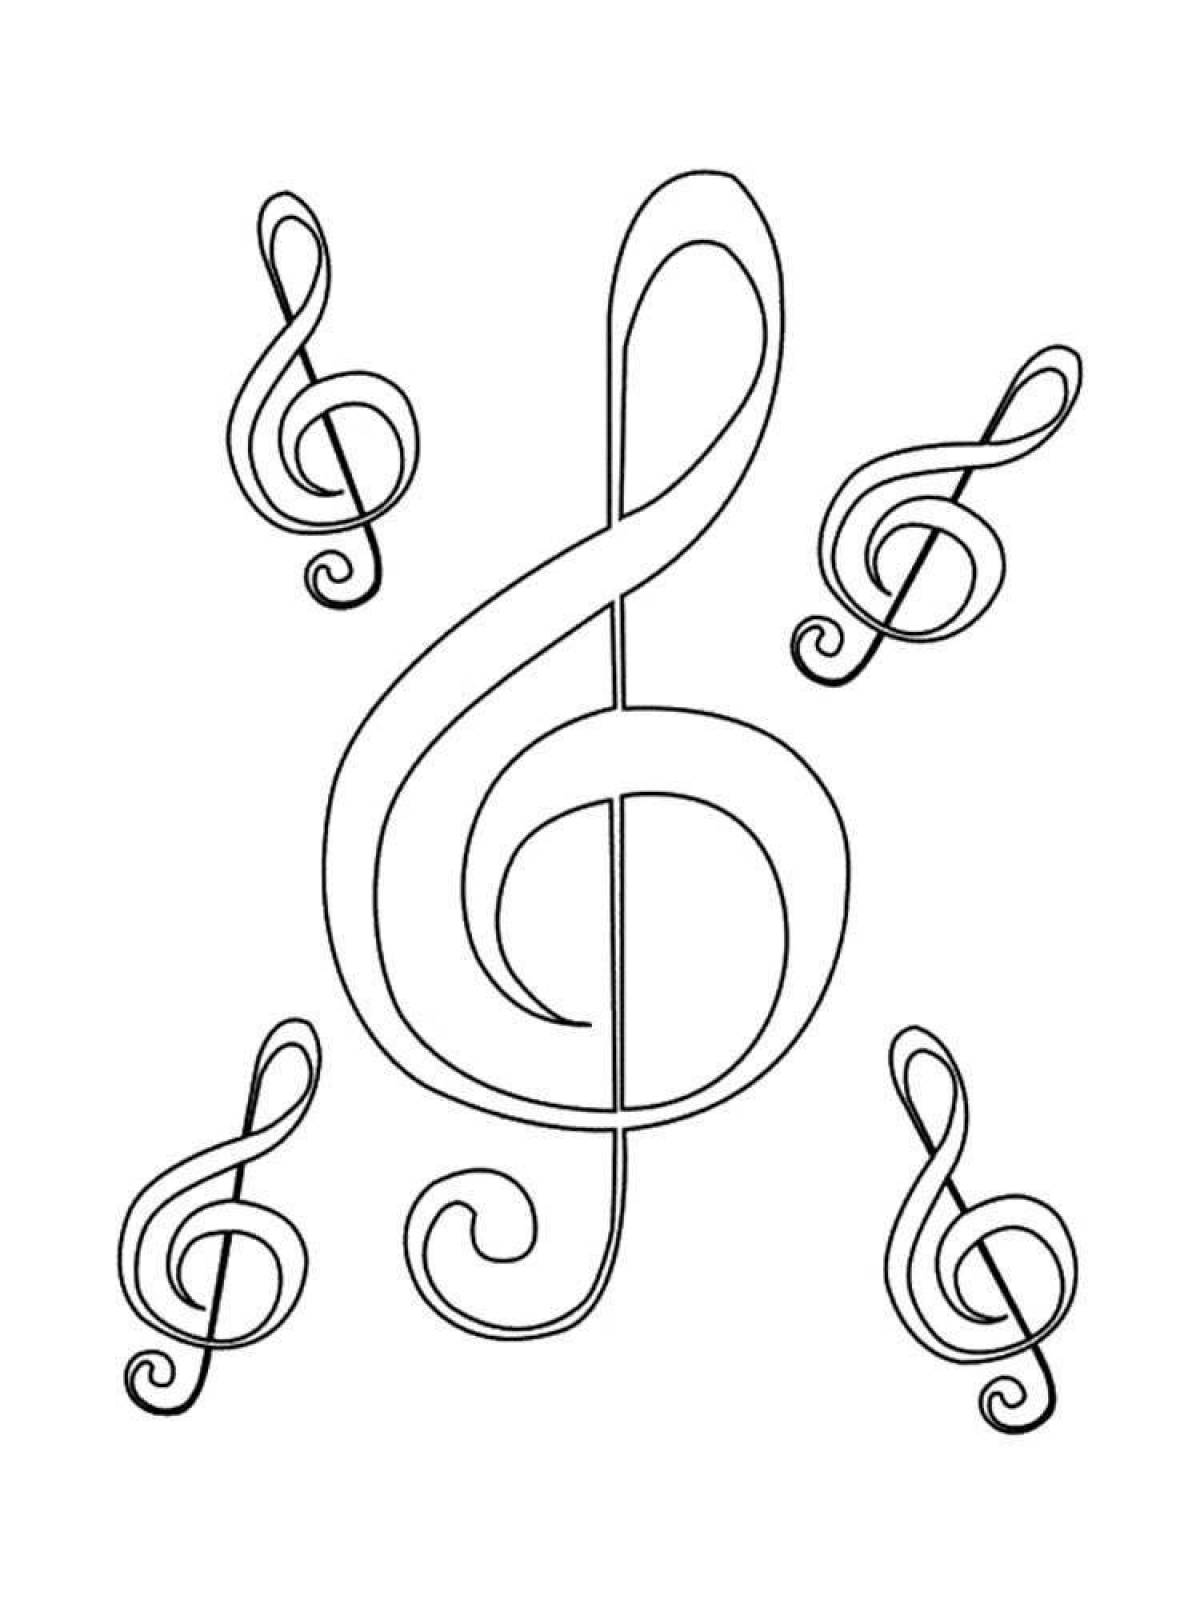 Music notes and treble clef #7